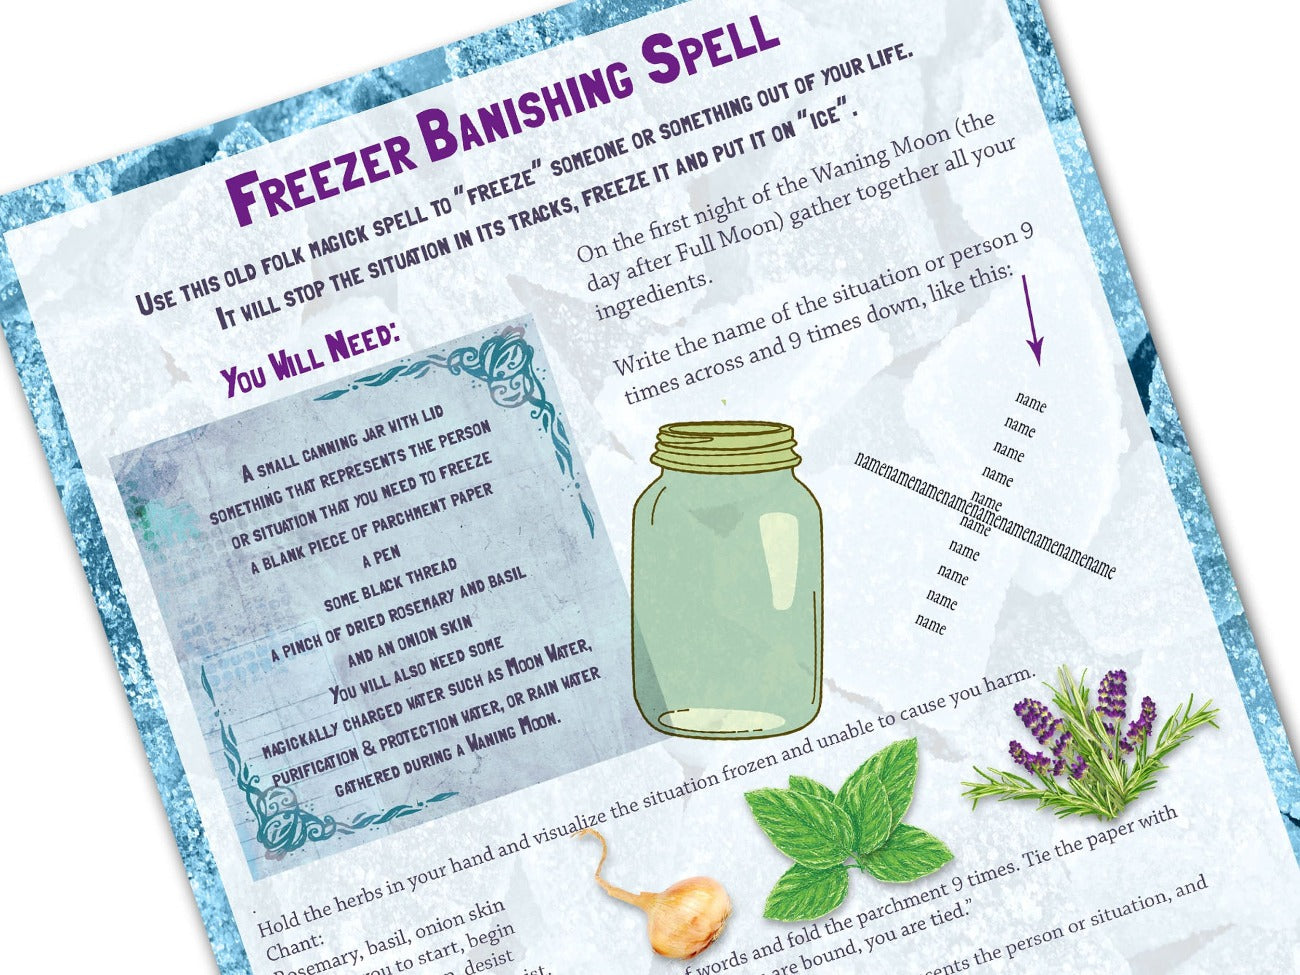 FREEZER BANISHING SPELL, Binding Defensive Magic, Ice Cube Go Away Spell, Put Your Enemy on Ice, Leave Me Alone, Wicca Freeze out bad luck - Morgana Magick Spell